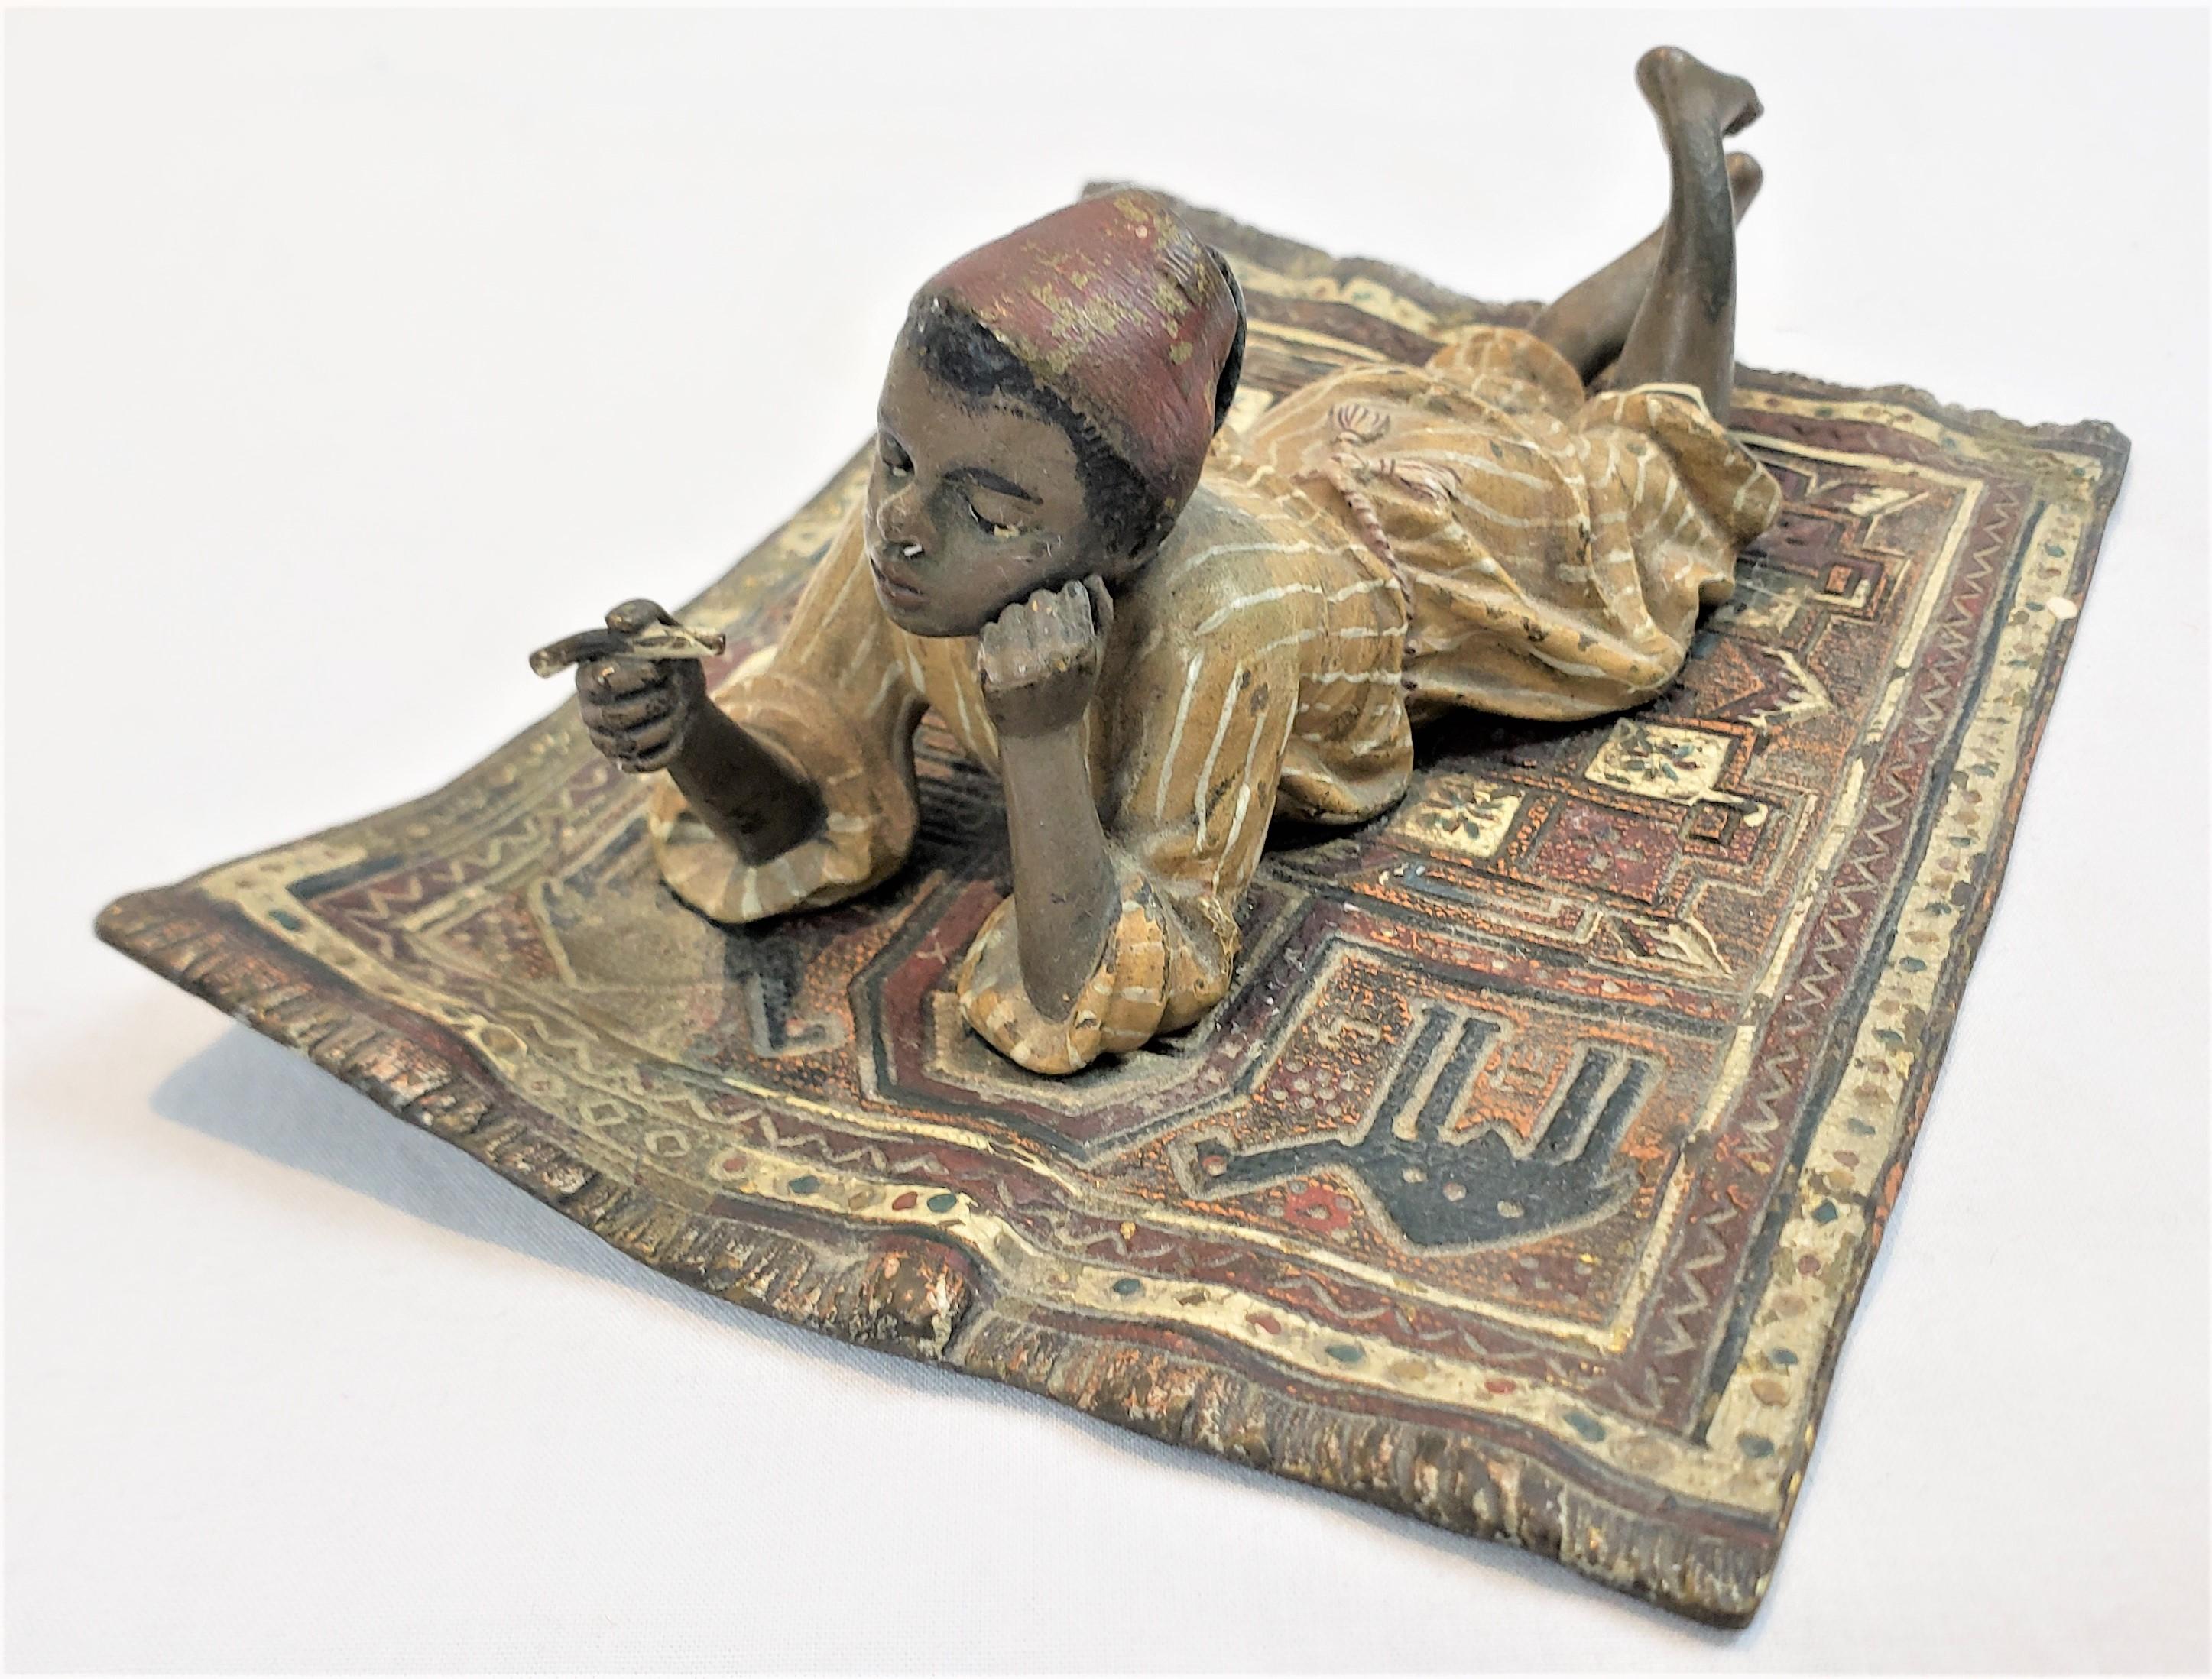 This sculpture was done by the renowned Franz Bergman of Austria in approximately 1900 in his signature Bessarabian style. The study is composed of cast bronze with a cold-painted finish depicting a young Arab boy laying on a carpet smoking a cigar.